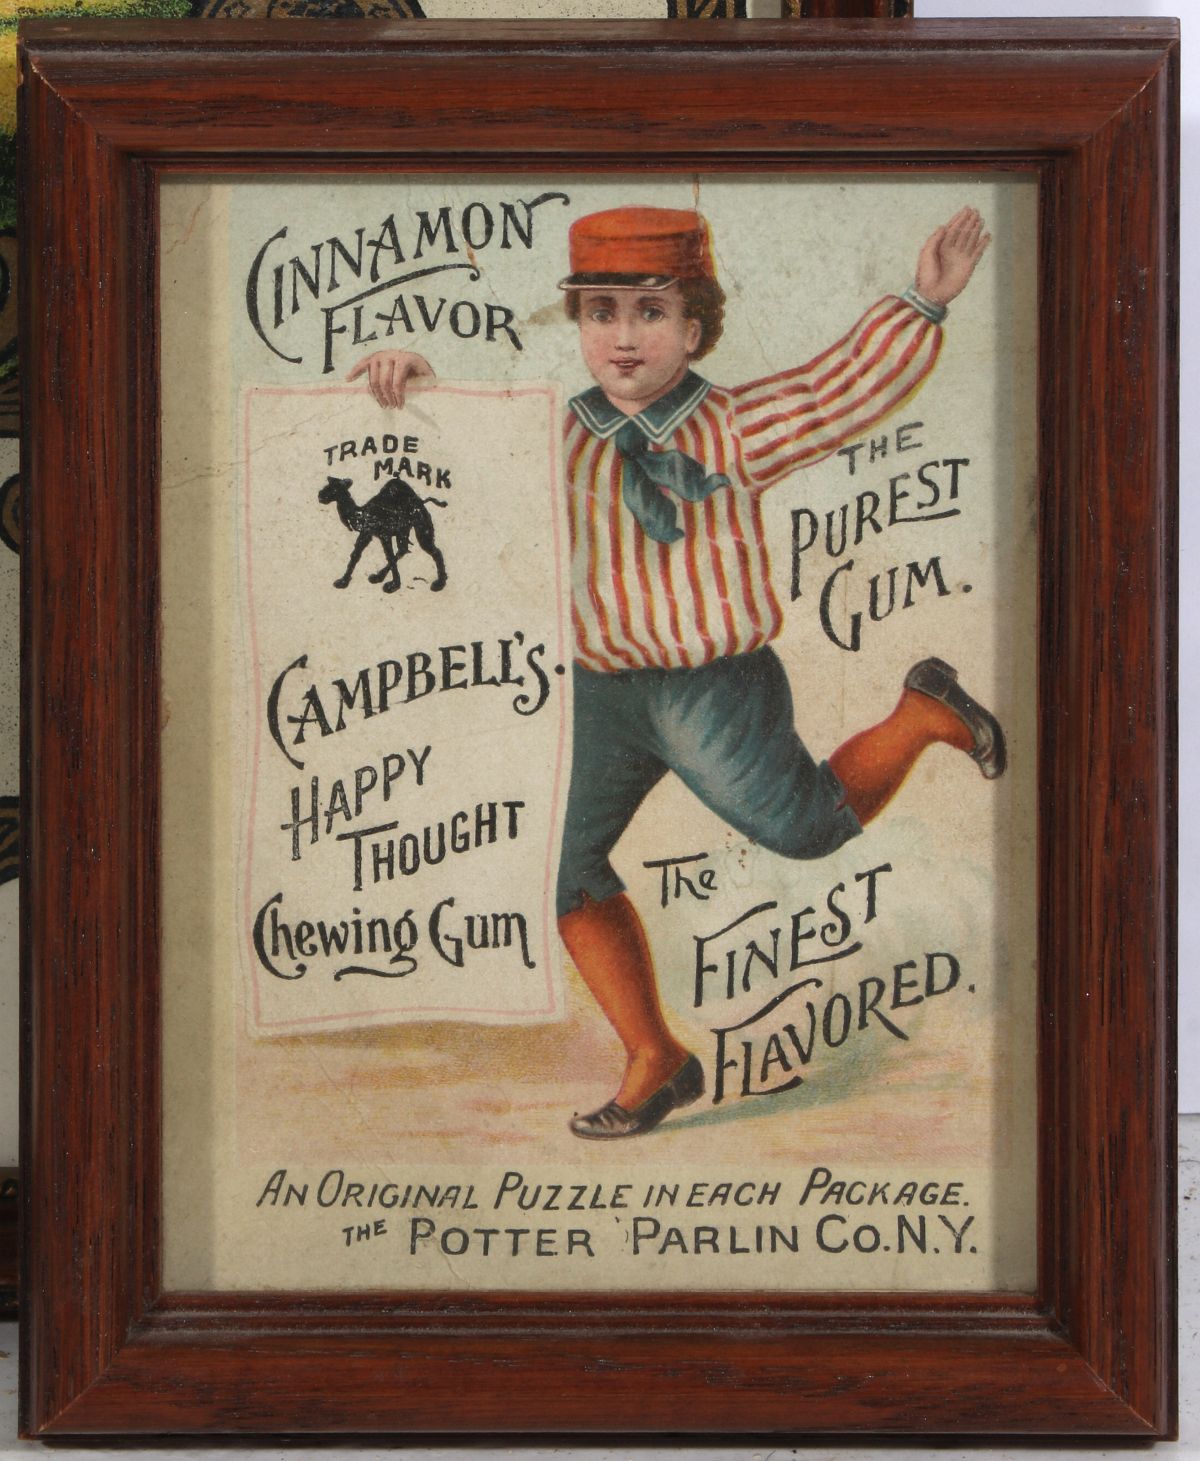 A CAMPBELL'S HAPPY THOUGHT GUM TRADE CARD C 1900